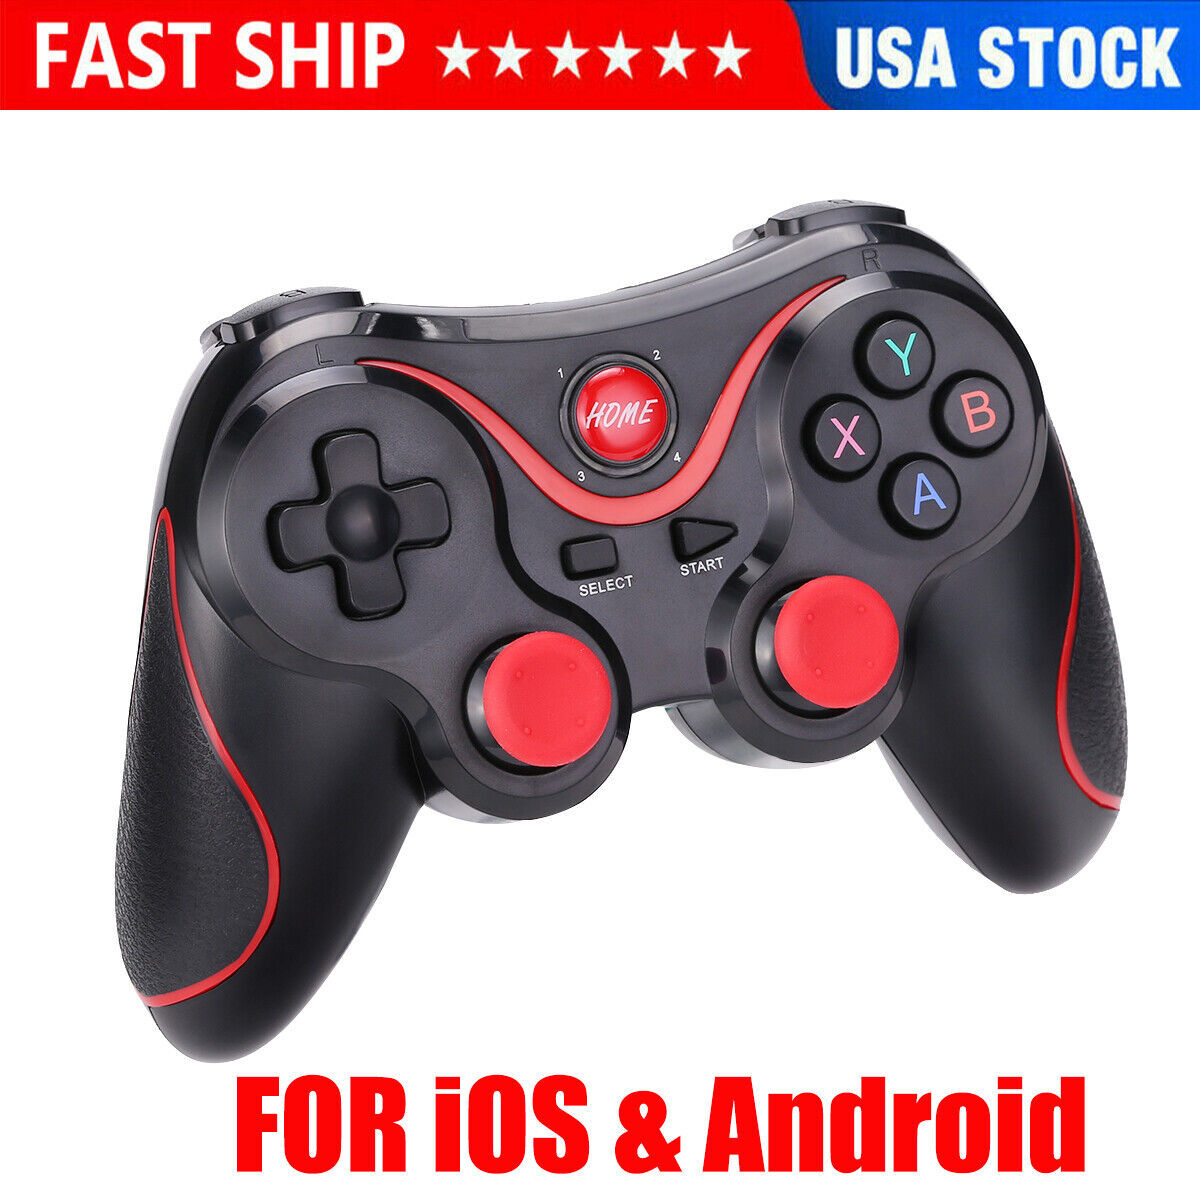 Bluetooth Wireless Controller Game Pad For Android & Ios Amazon Fire Tv Stick - $24.37